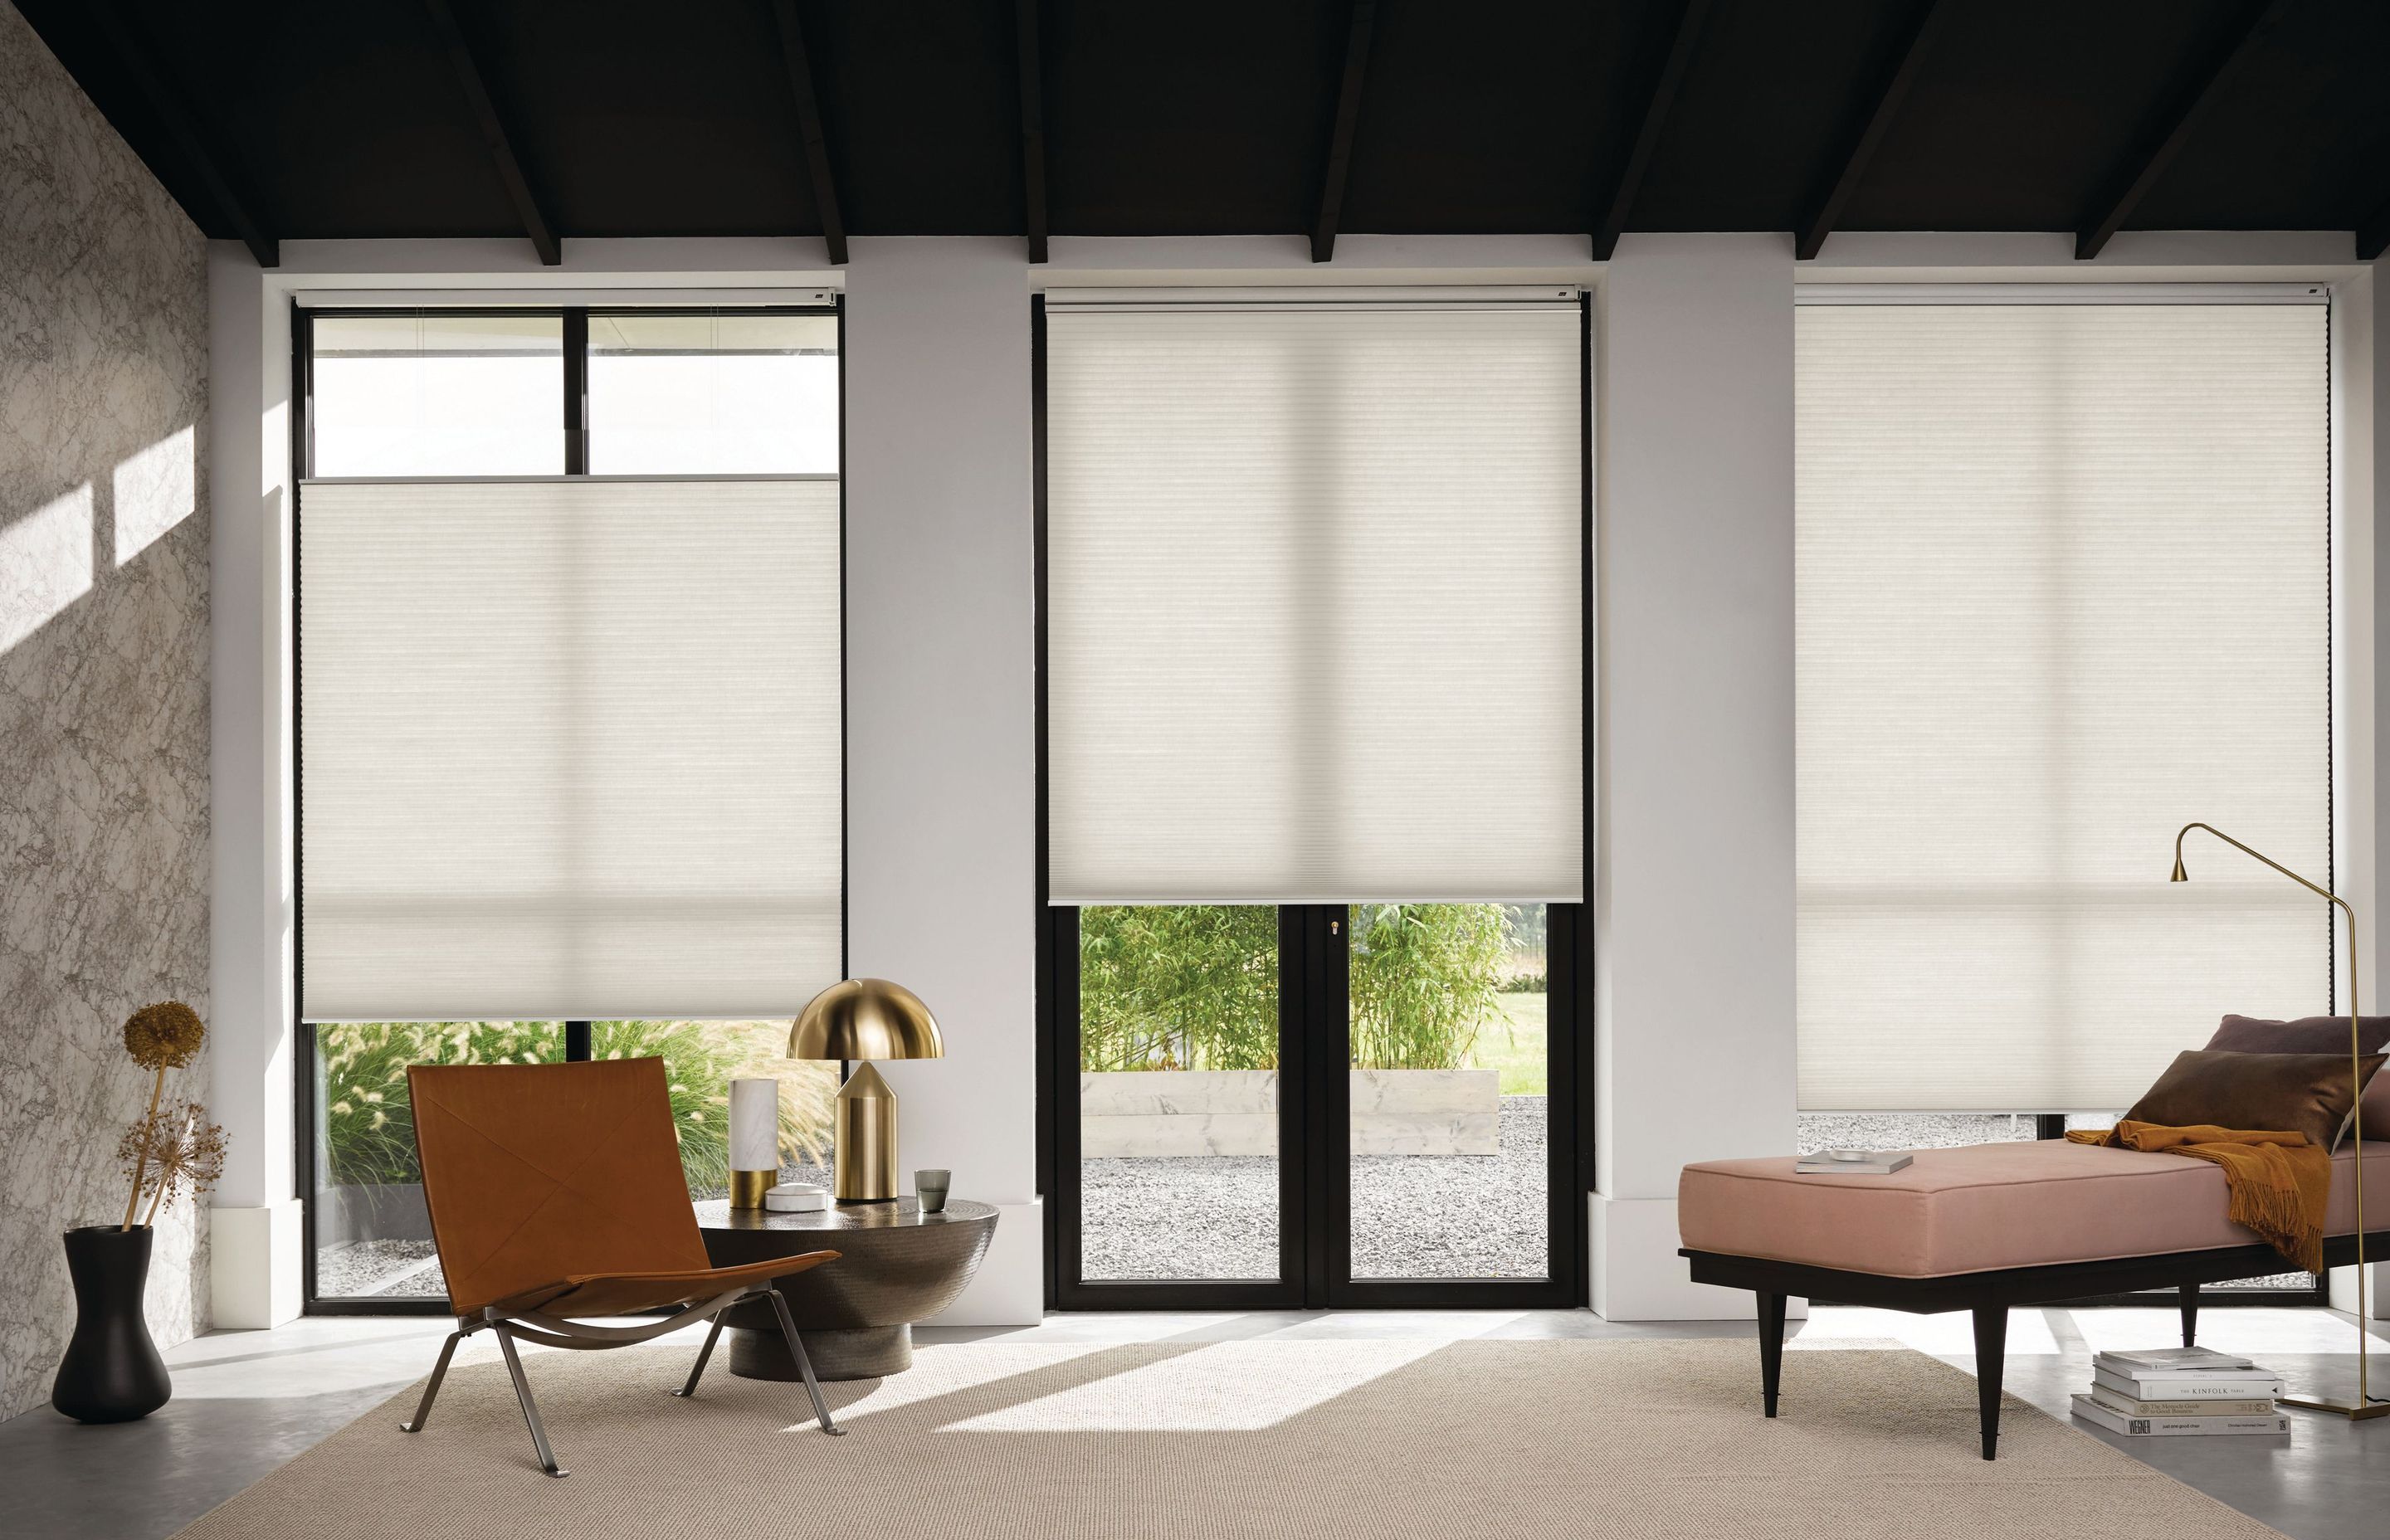 Luxaflex Duette Shades are made of two or more layers of pleated, reinforced fabrics bonded together and joined at the pleats to form compartments of trapped air. The overall effect is to help keep a home warm in winter and cool in summer.